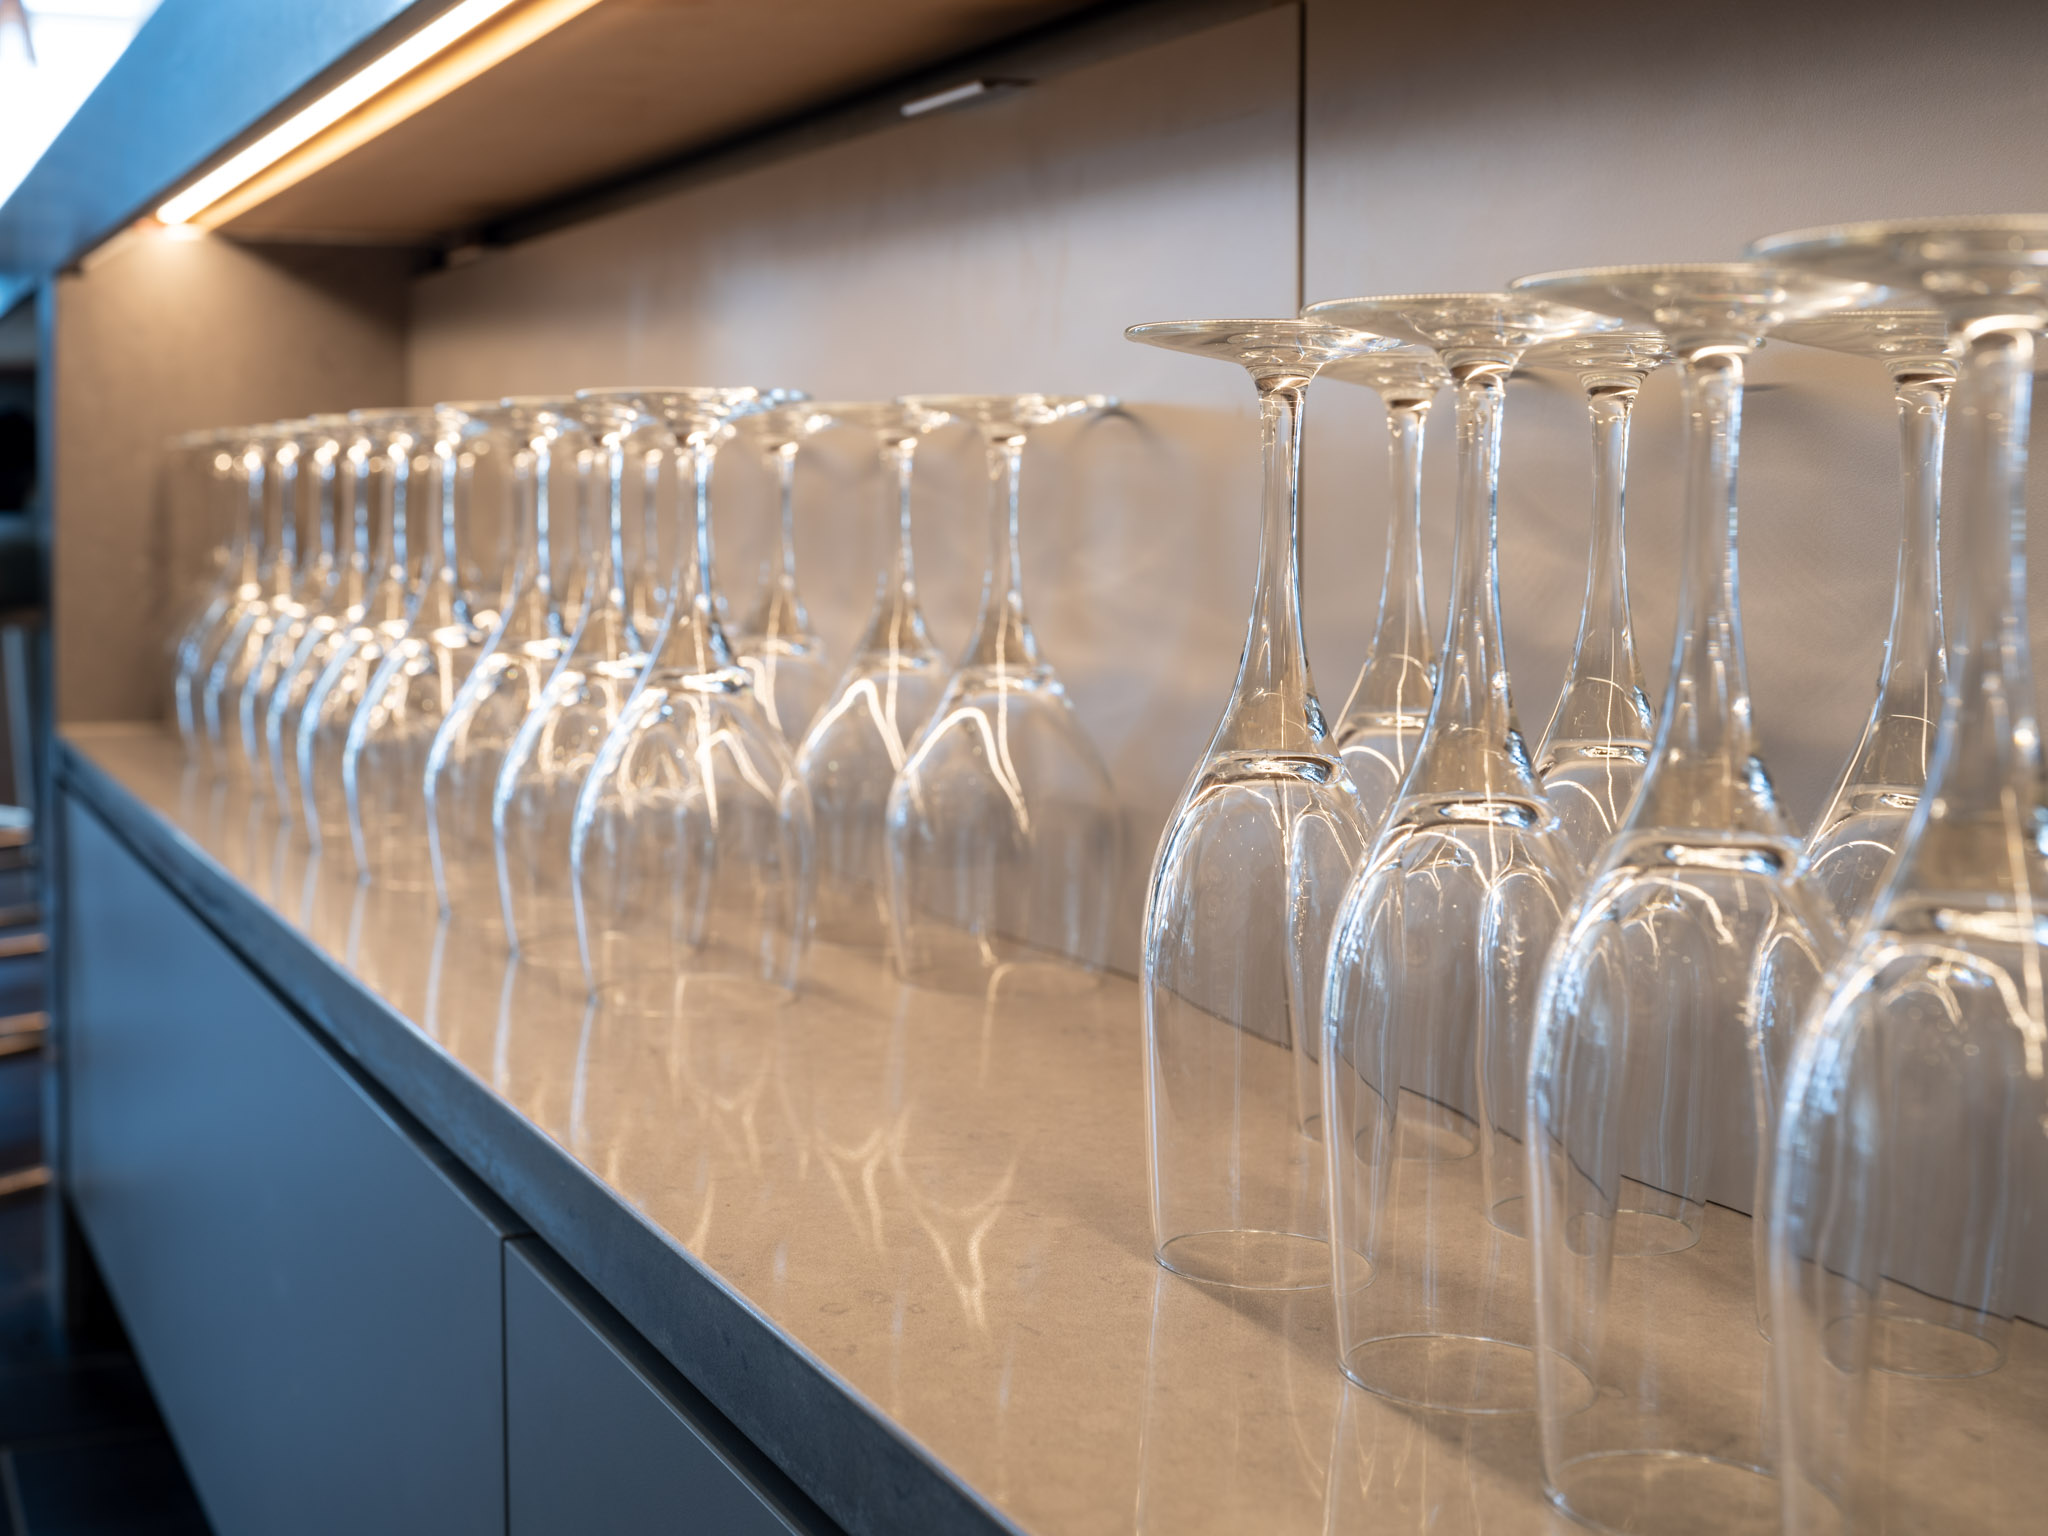 a row of wine glasses on a counter